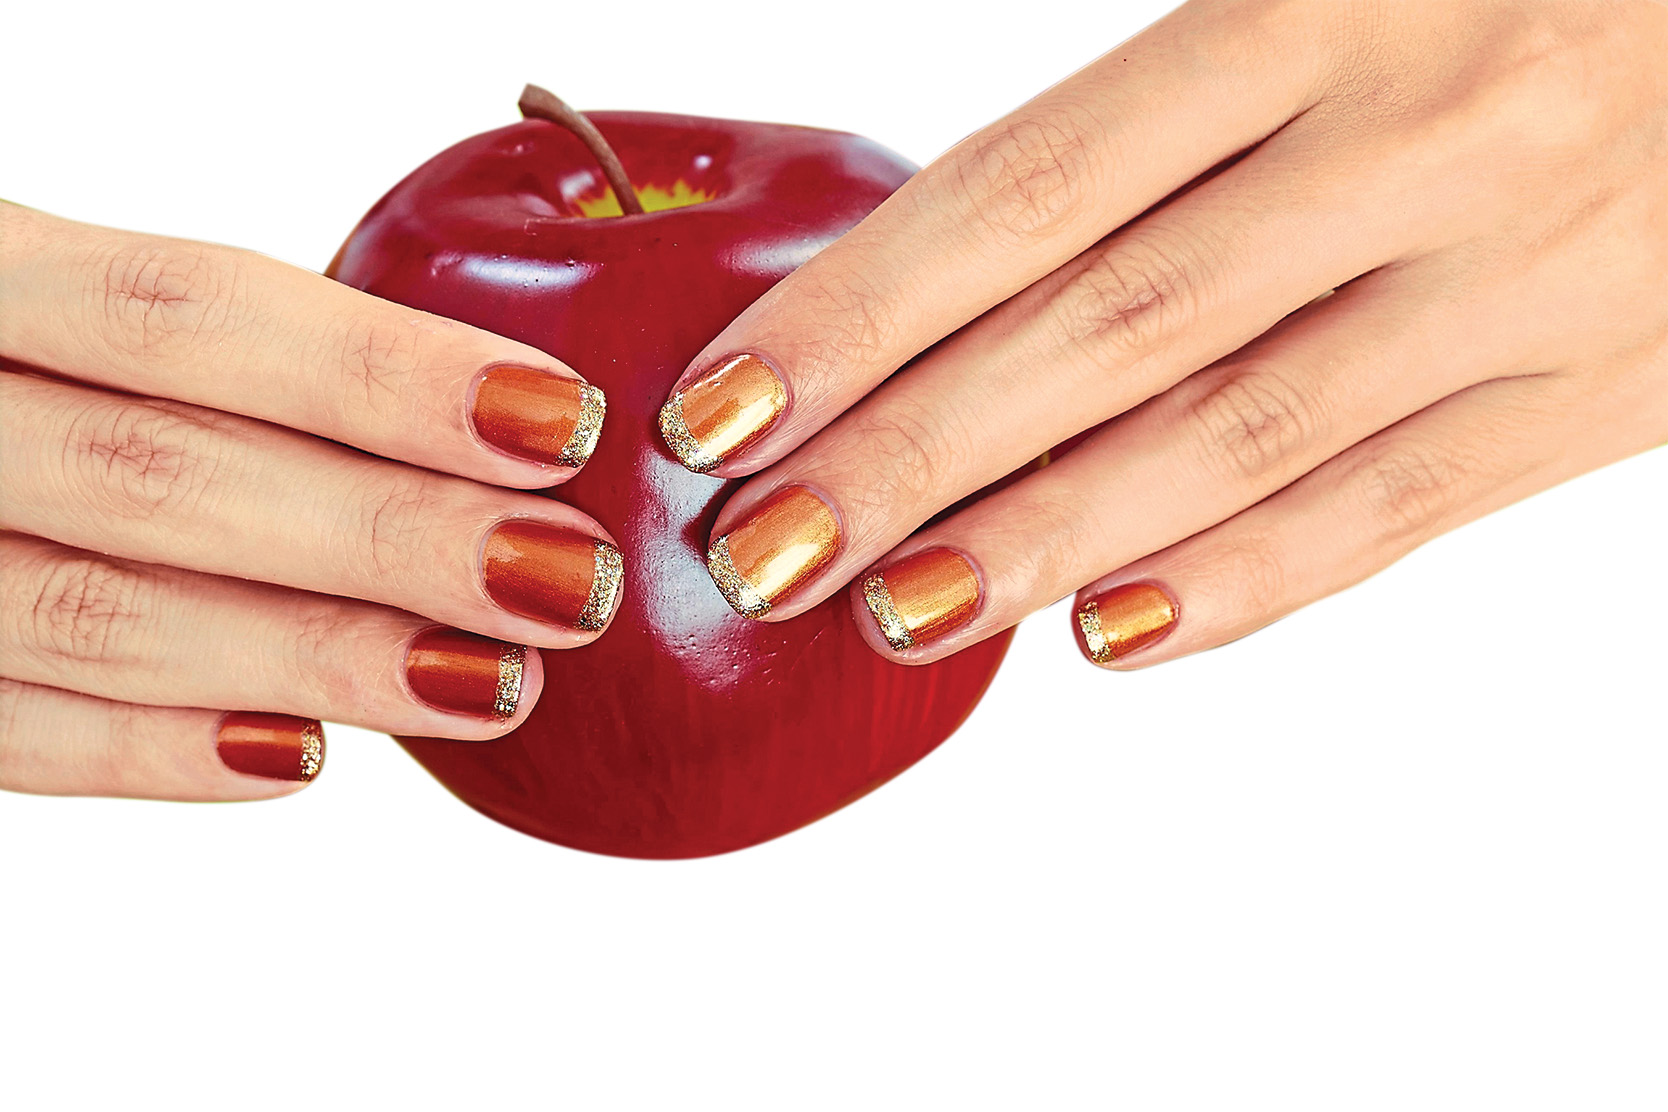 A woman holding an apple with nails painted with a French manicure in orange and gold polish shades